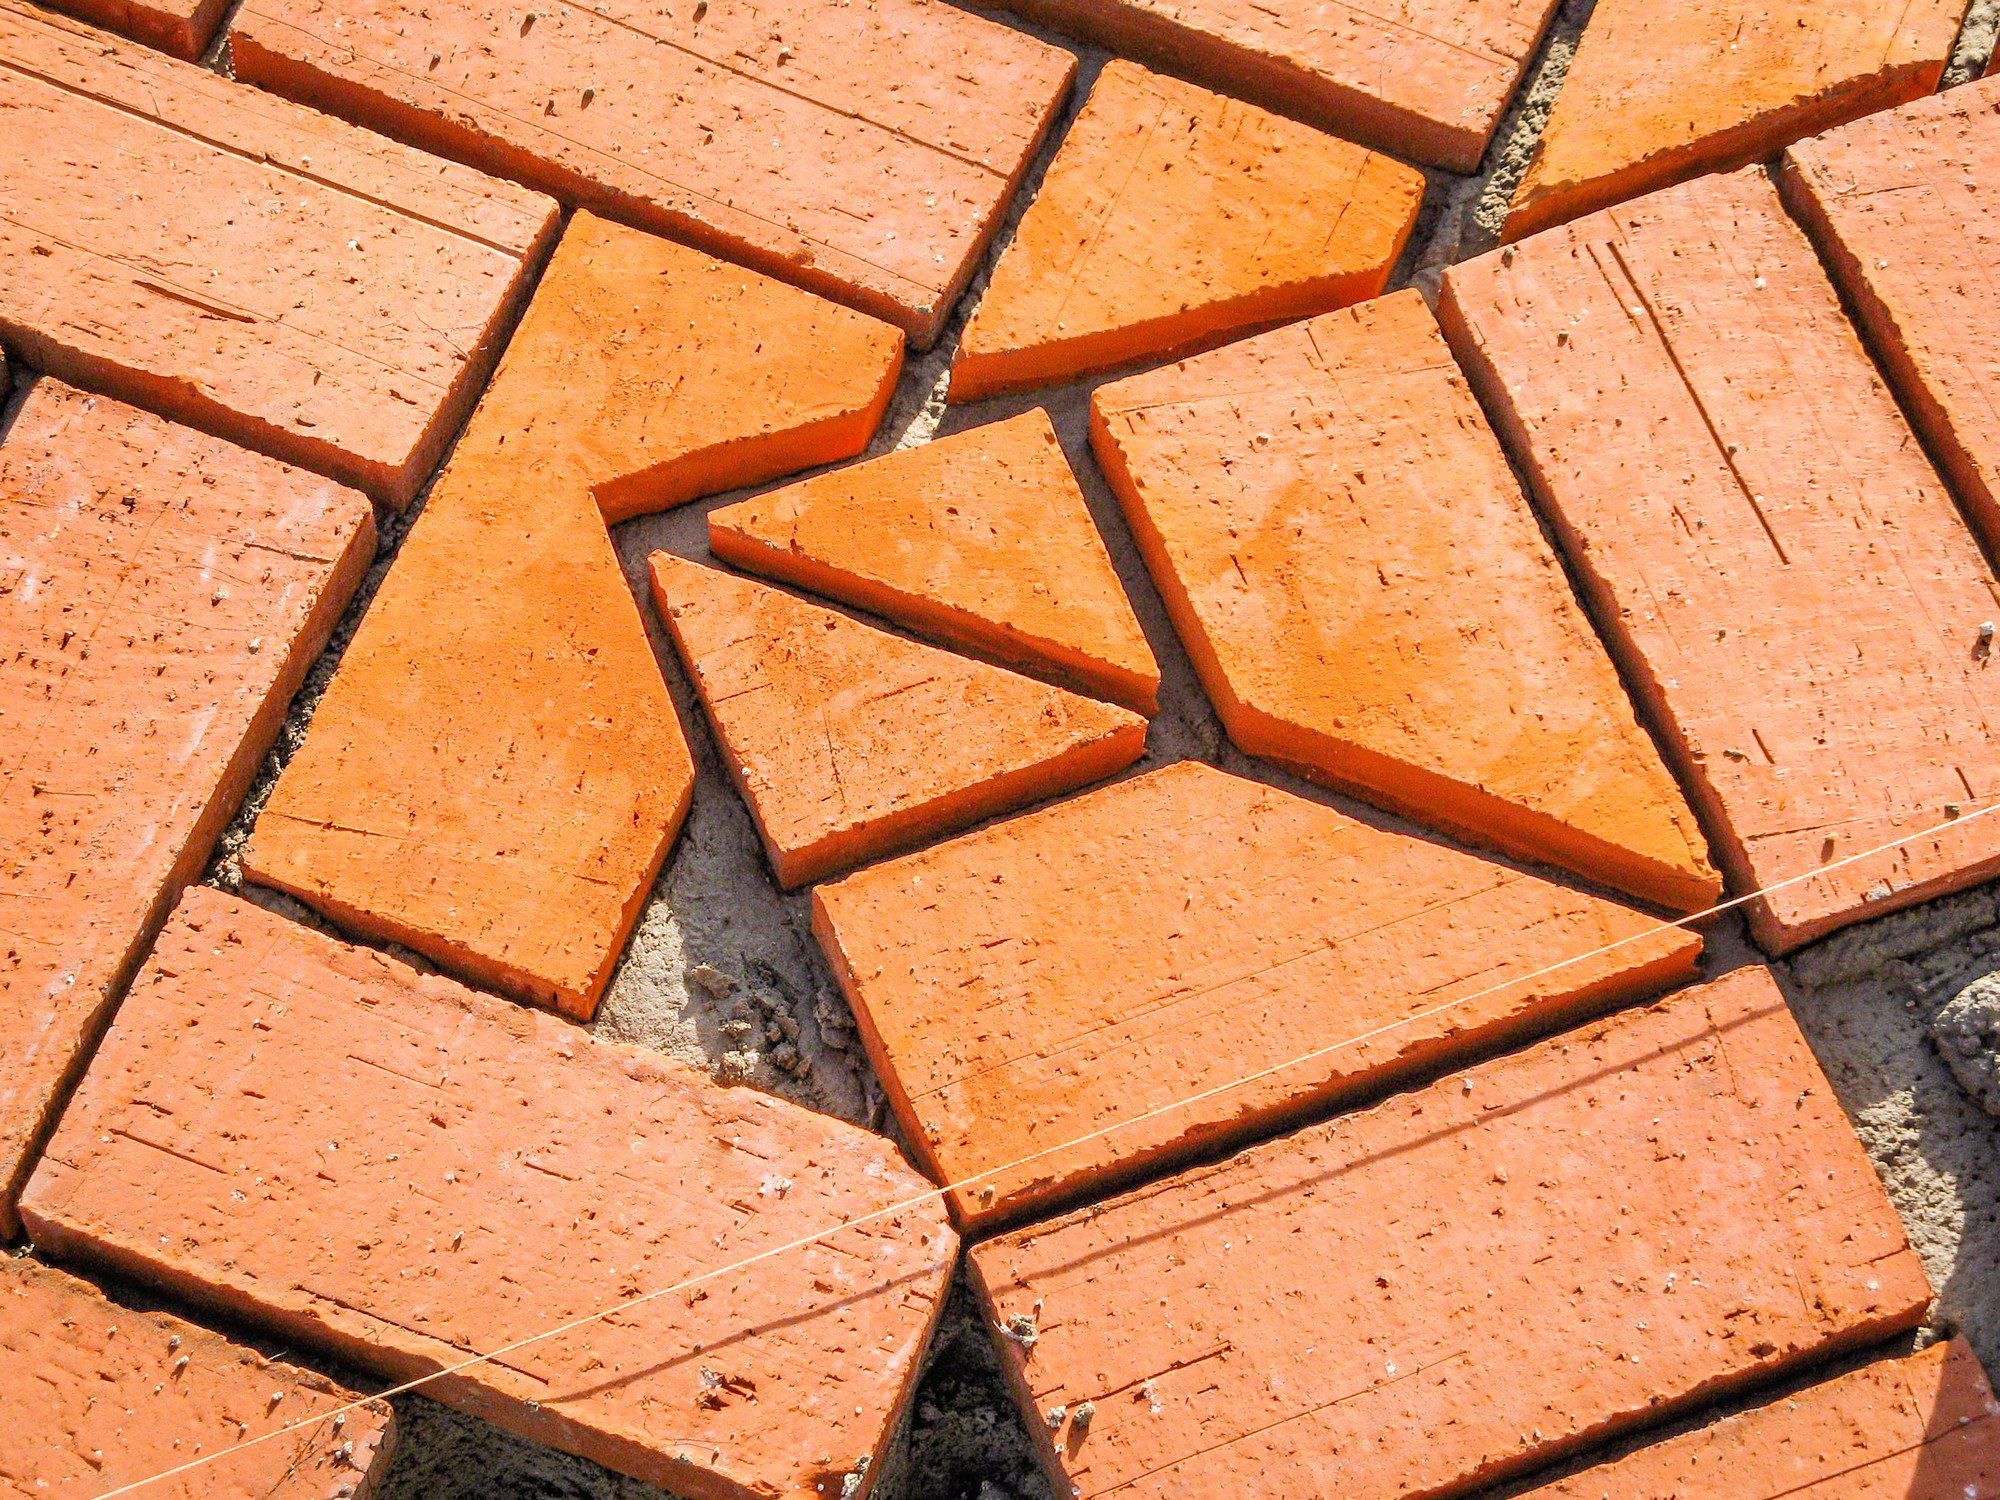 The image shows a number of terracotta-coloured paving stones. They are laid in what appears to be an incomplete pattern or during the process of being installed. The bricks are arranged in a haphazard manner, which suggests that the paving process may be in an early or intermediate stage, with gaps and unevenness present. There is some sandy material between the bricks to set them in place once they are properly aligned. The sunlight is casting a warm glow on the scene, enhancing the rich orange and reddish tones of the bricks.